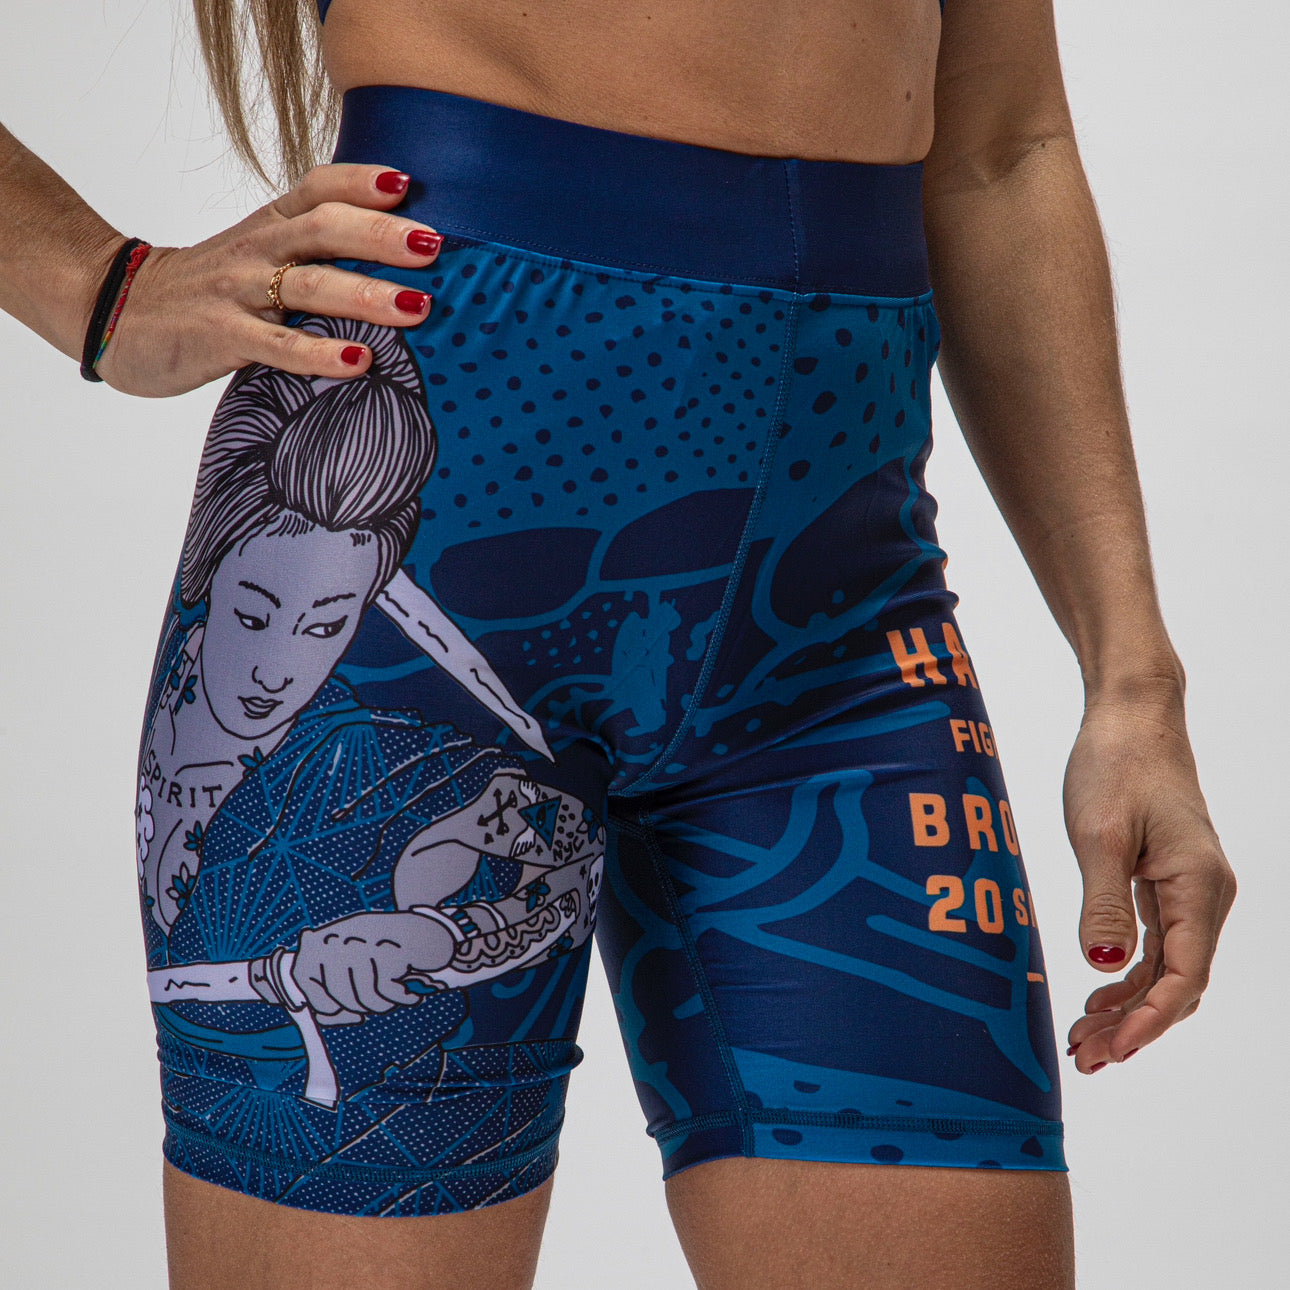 Onna Blue Compression Shorts for Women